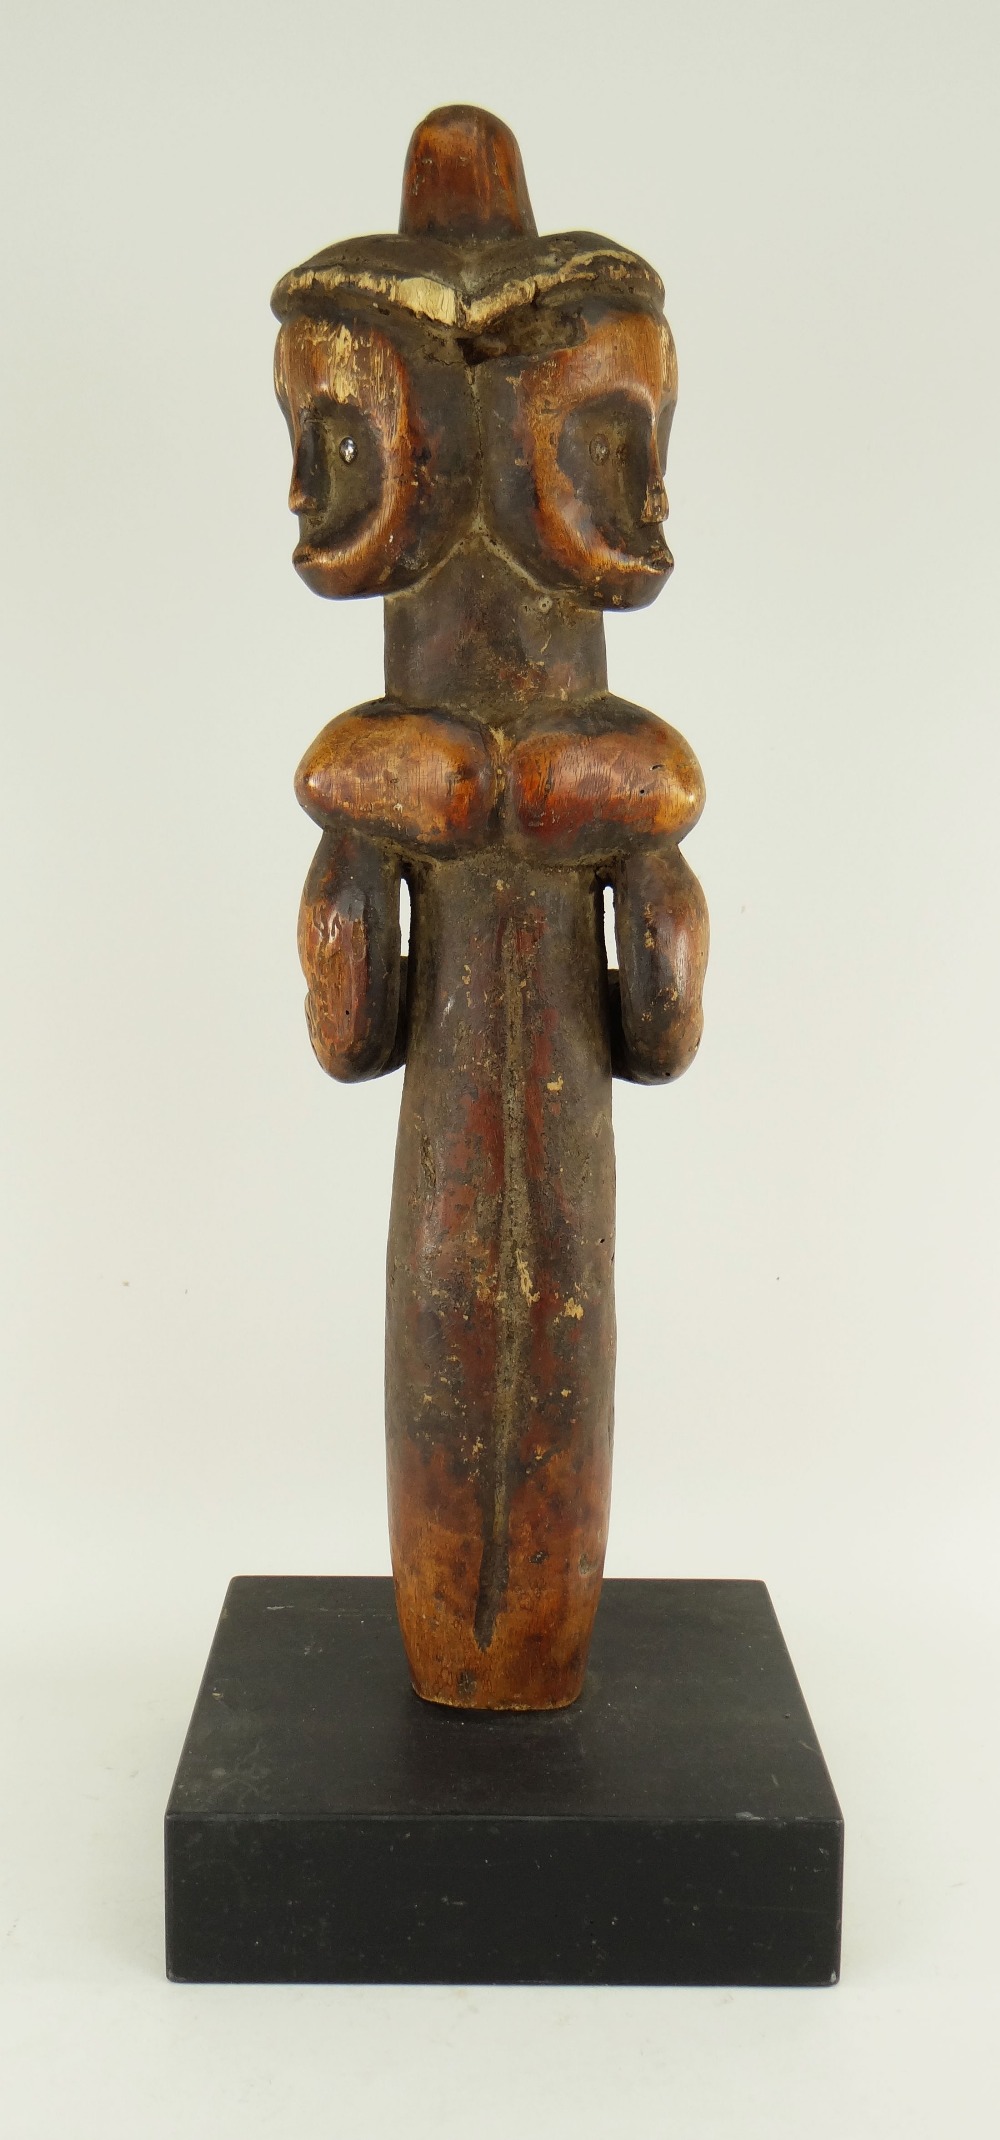 FANG RELIQUARY GUARDIAN FIGURE with three faces, 51cms high - Image 2 of 2